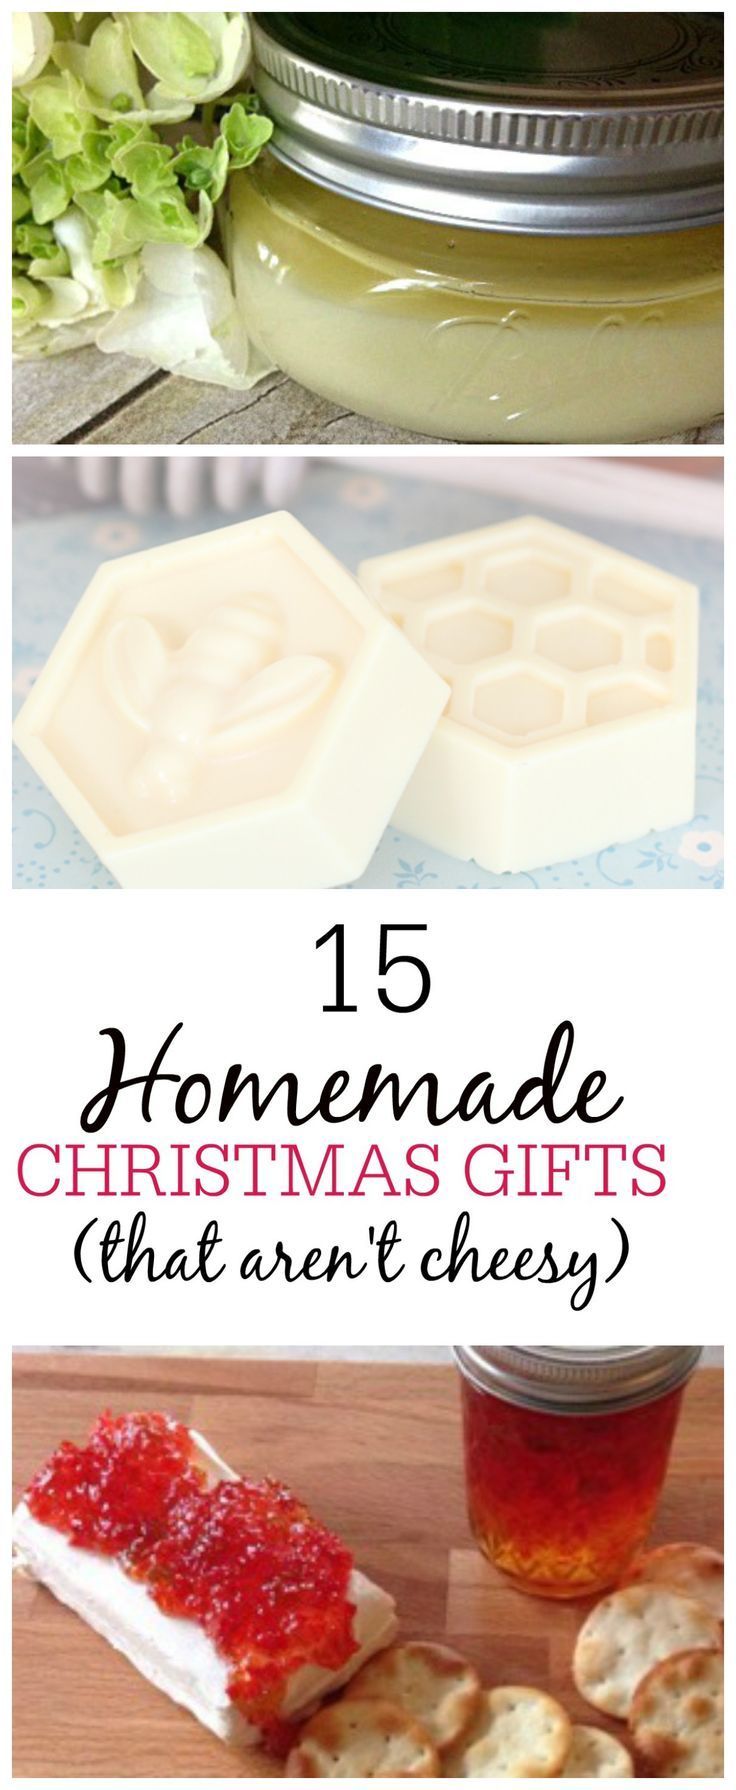 15 Homemade Christmas Gifts - 15 Homemade Christmas Gifts -   18 homemade food gifts for xmas ideas